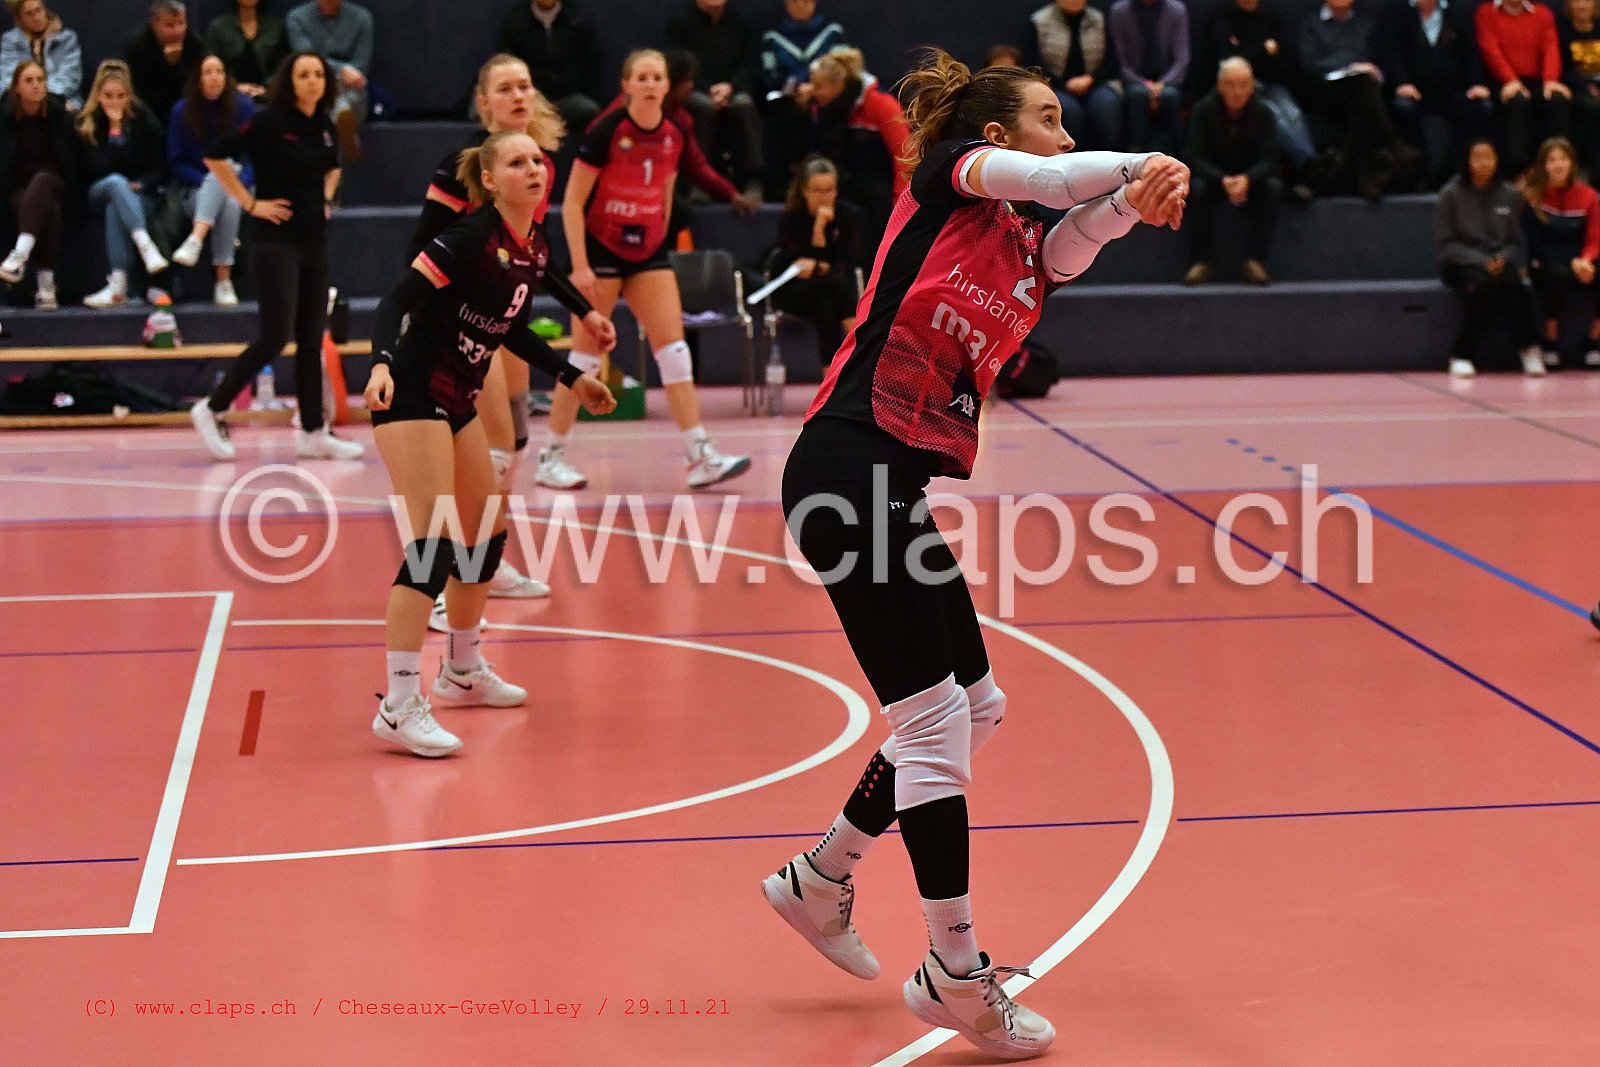 20211128 Cheseaux - Genevevolley